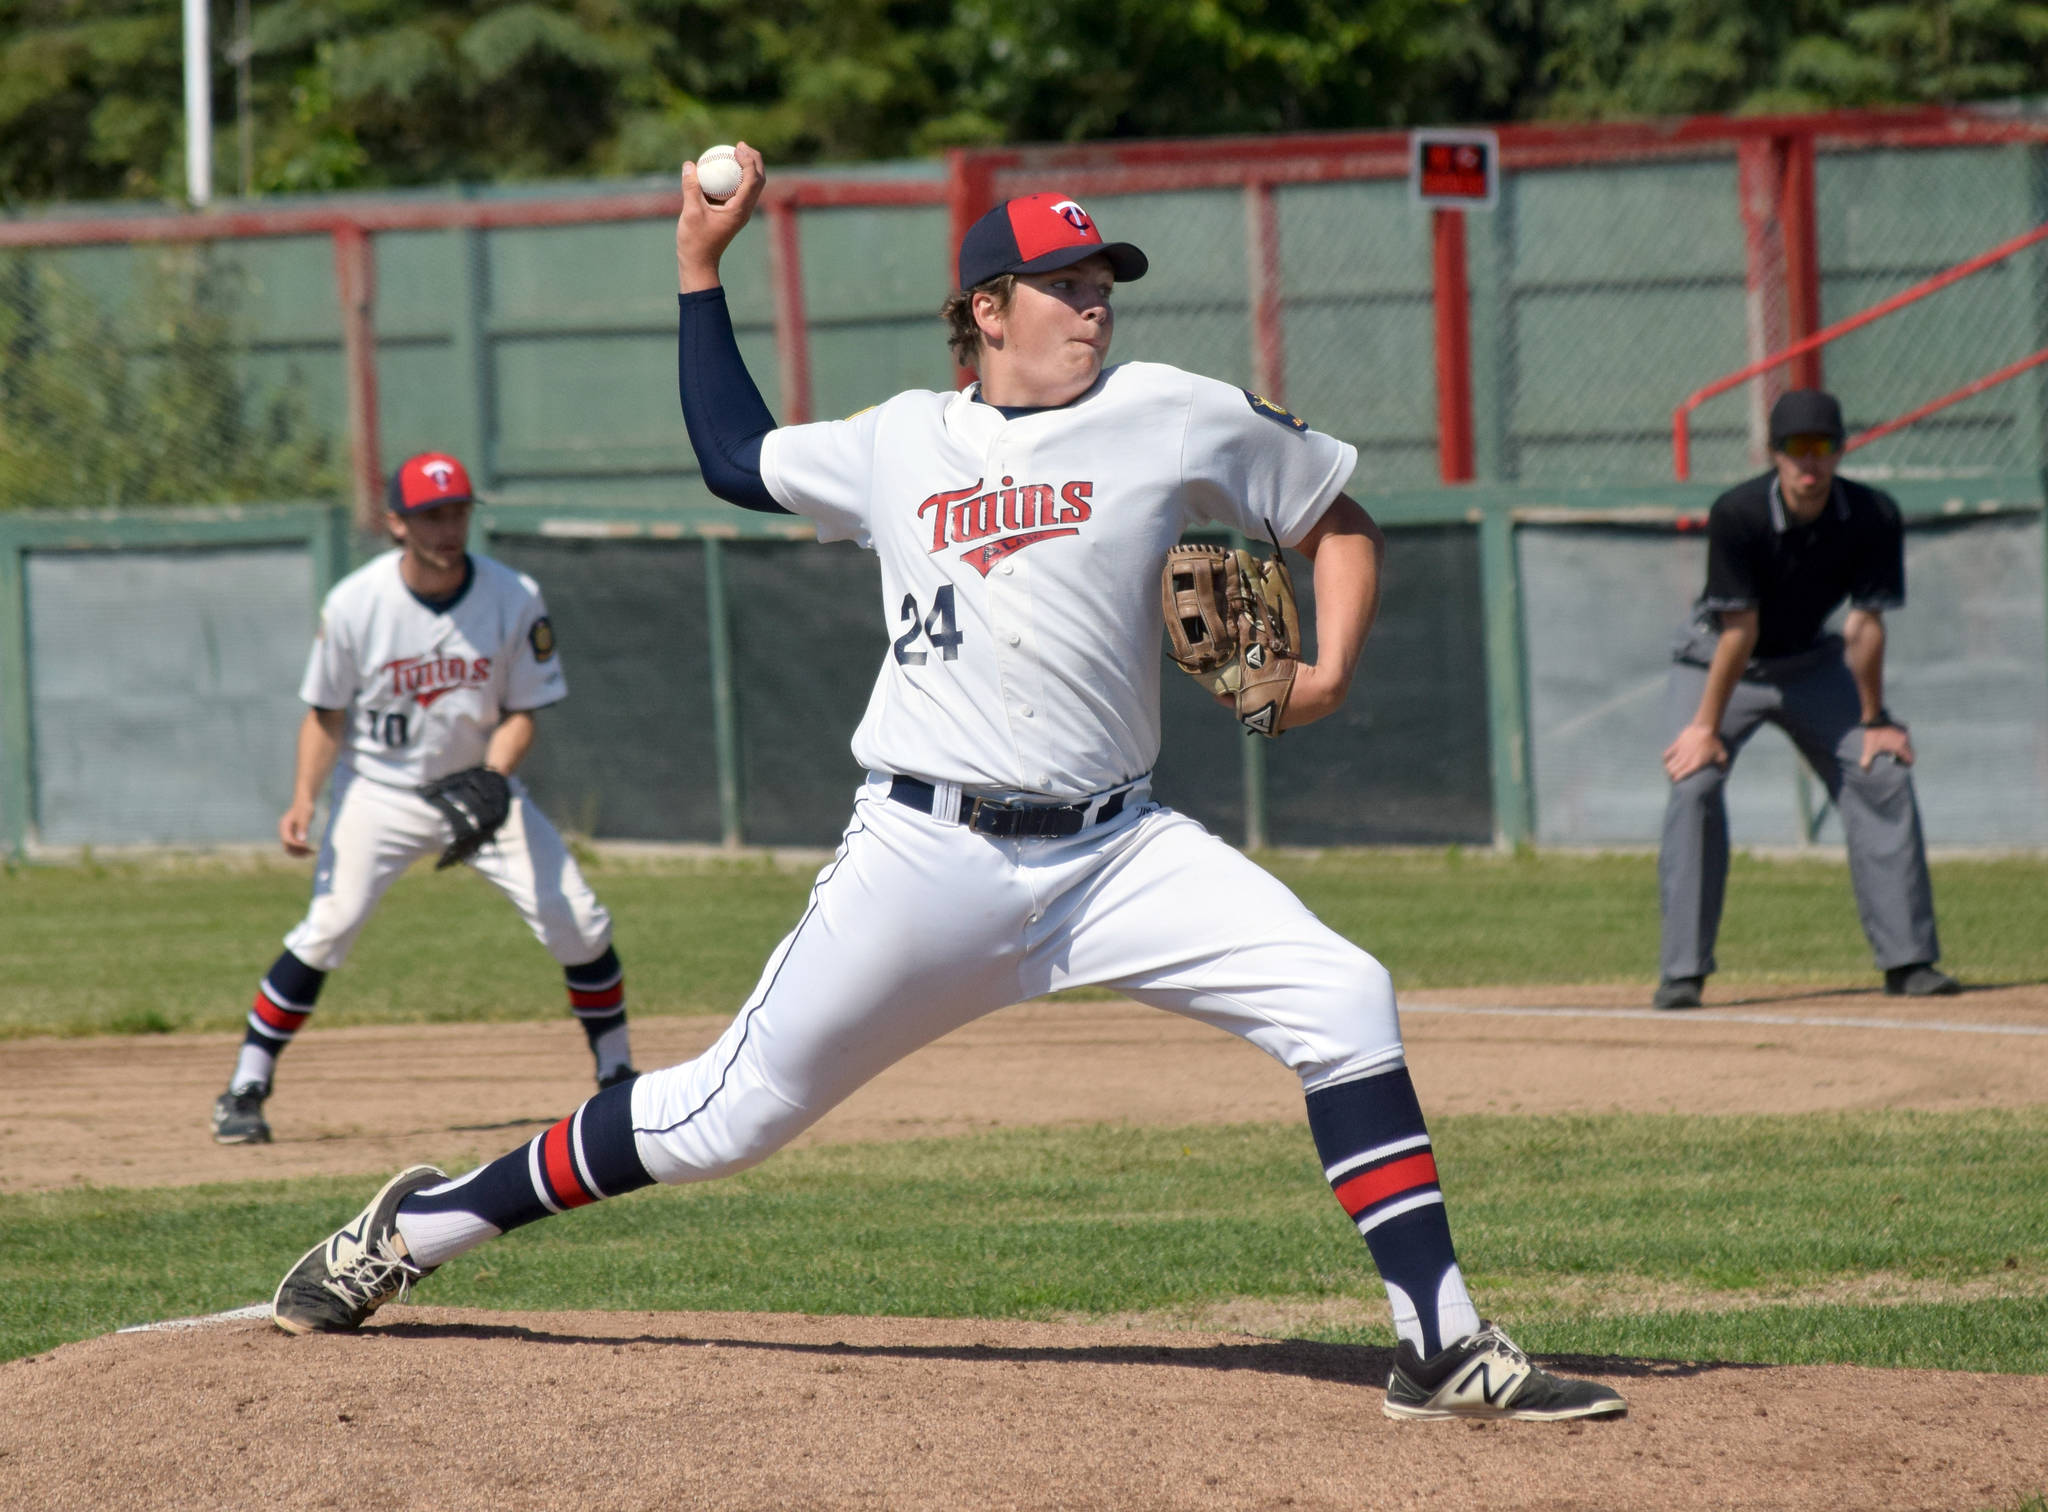 Post 20 Twins pitcher Logan Smith delivers to Dimond on Sunday, June 23, 2019, at Coral Seymour Memorial Park in Kenai, Alaska. (Photo by Jeff Helminiak/Peninsula Clarion)